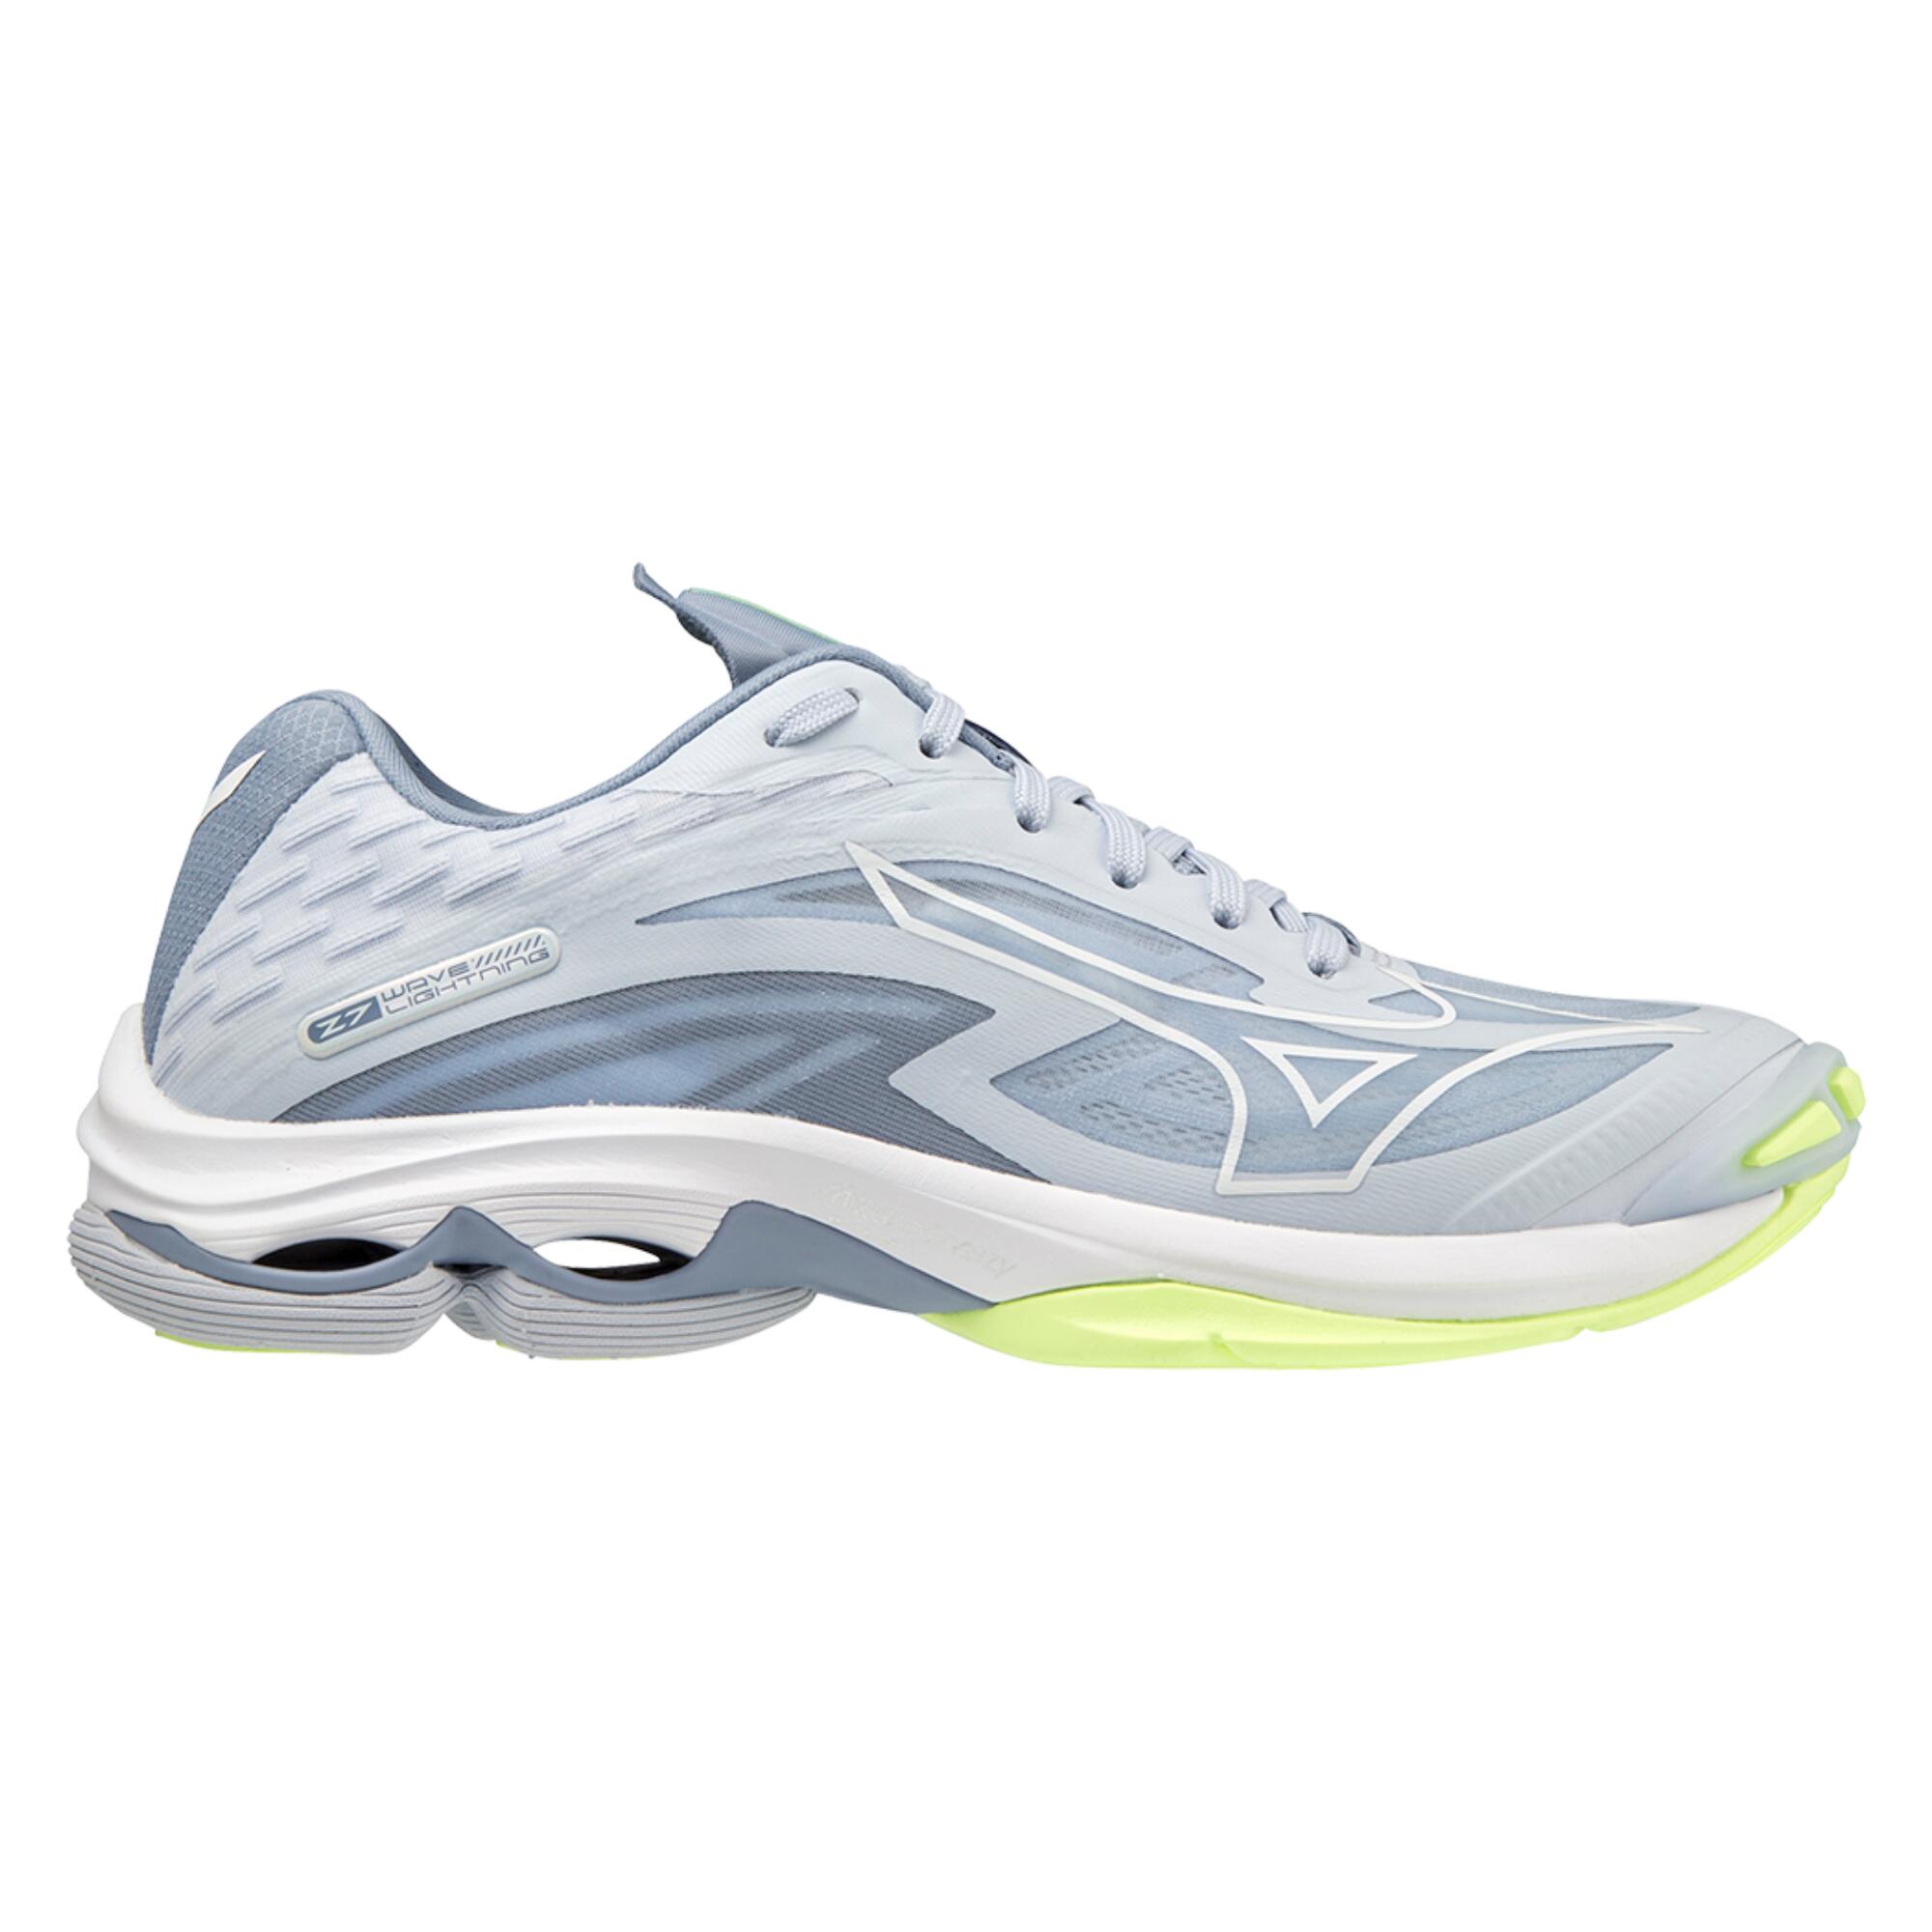 WOMEN'S VOLLEYBALL SHOES MIZUNO LIGHTNING Z7 LOW GREY - LIME 1/5